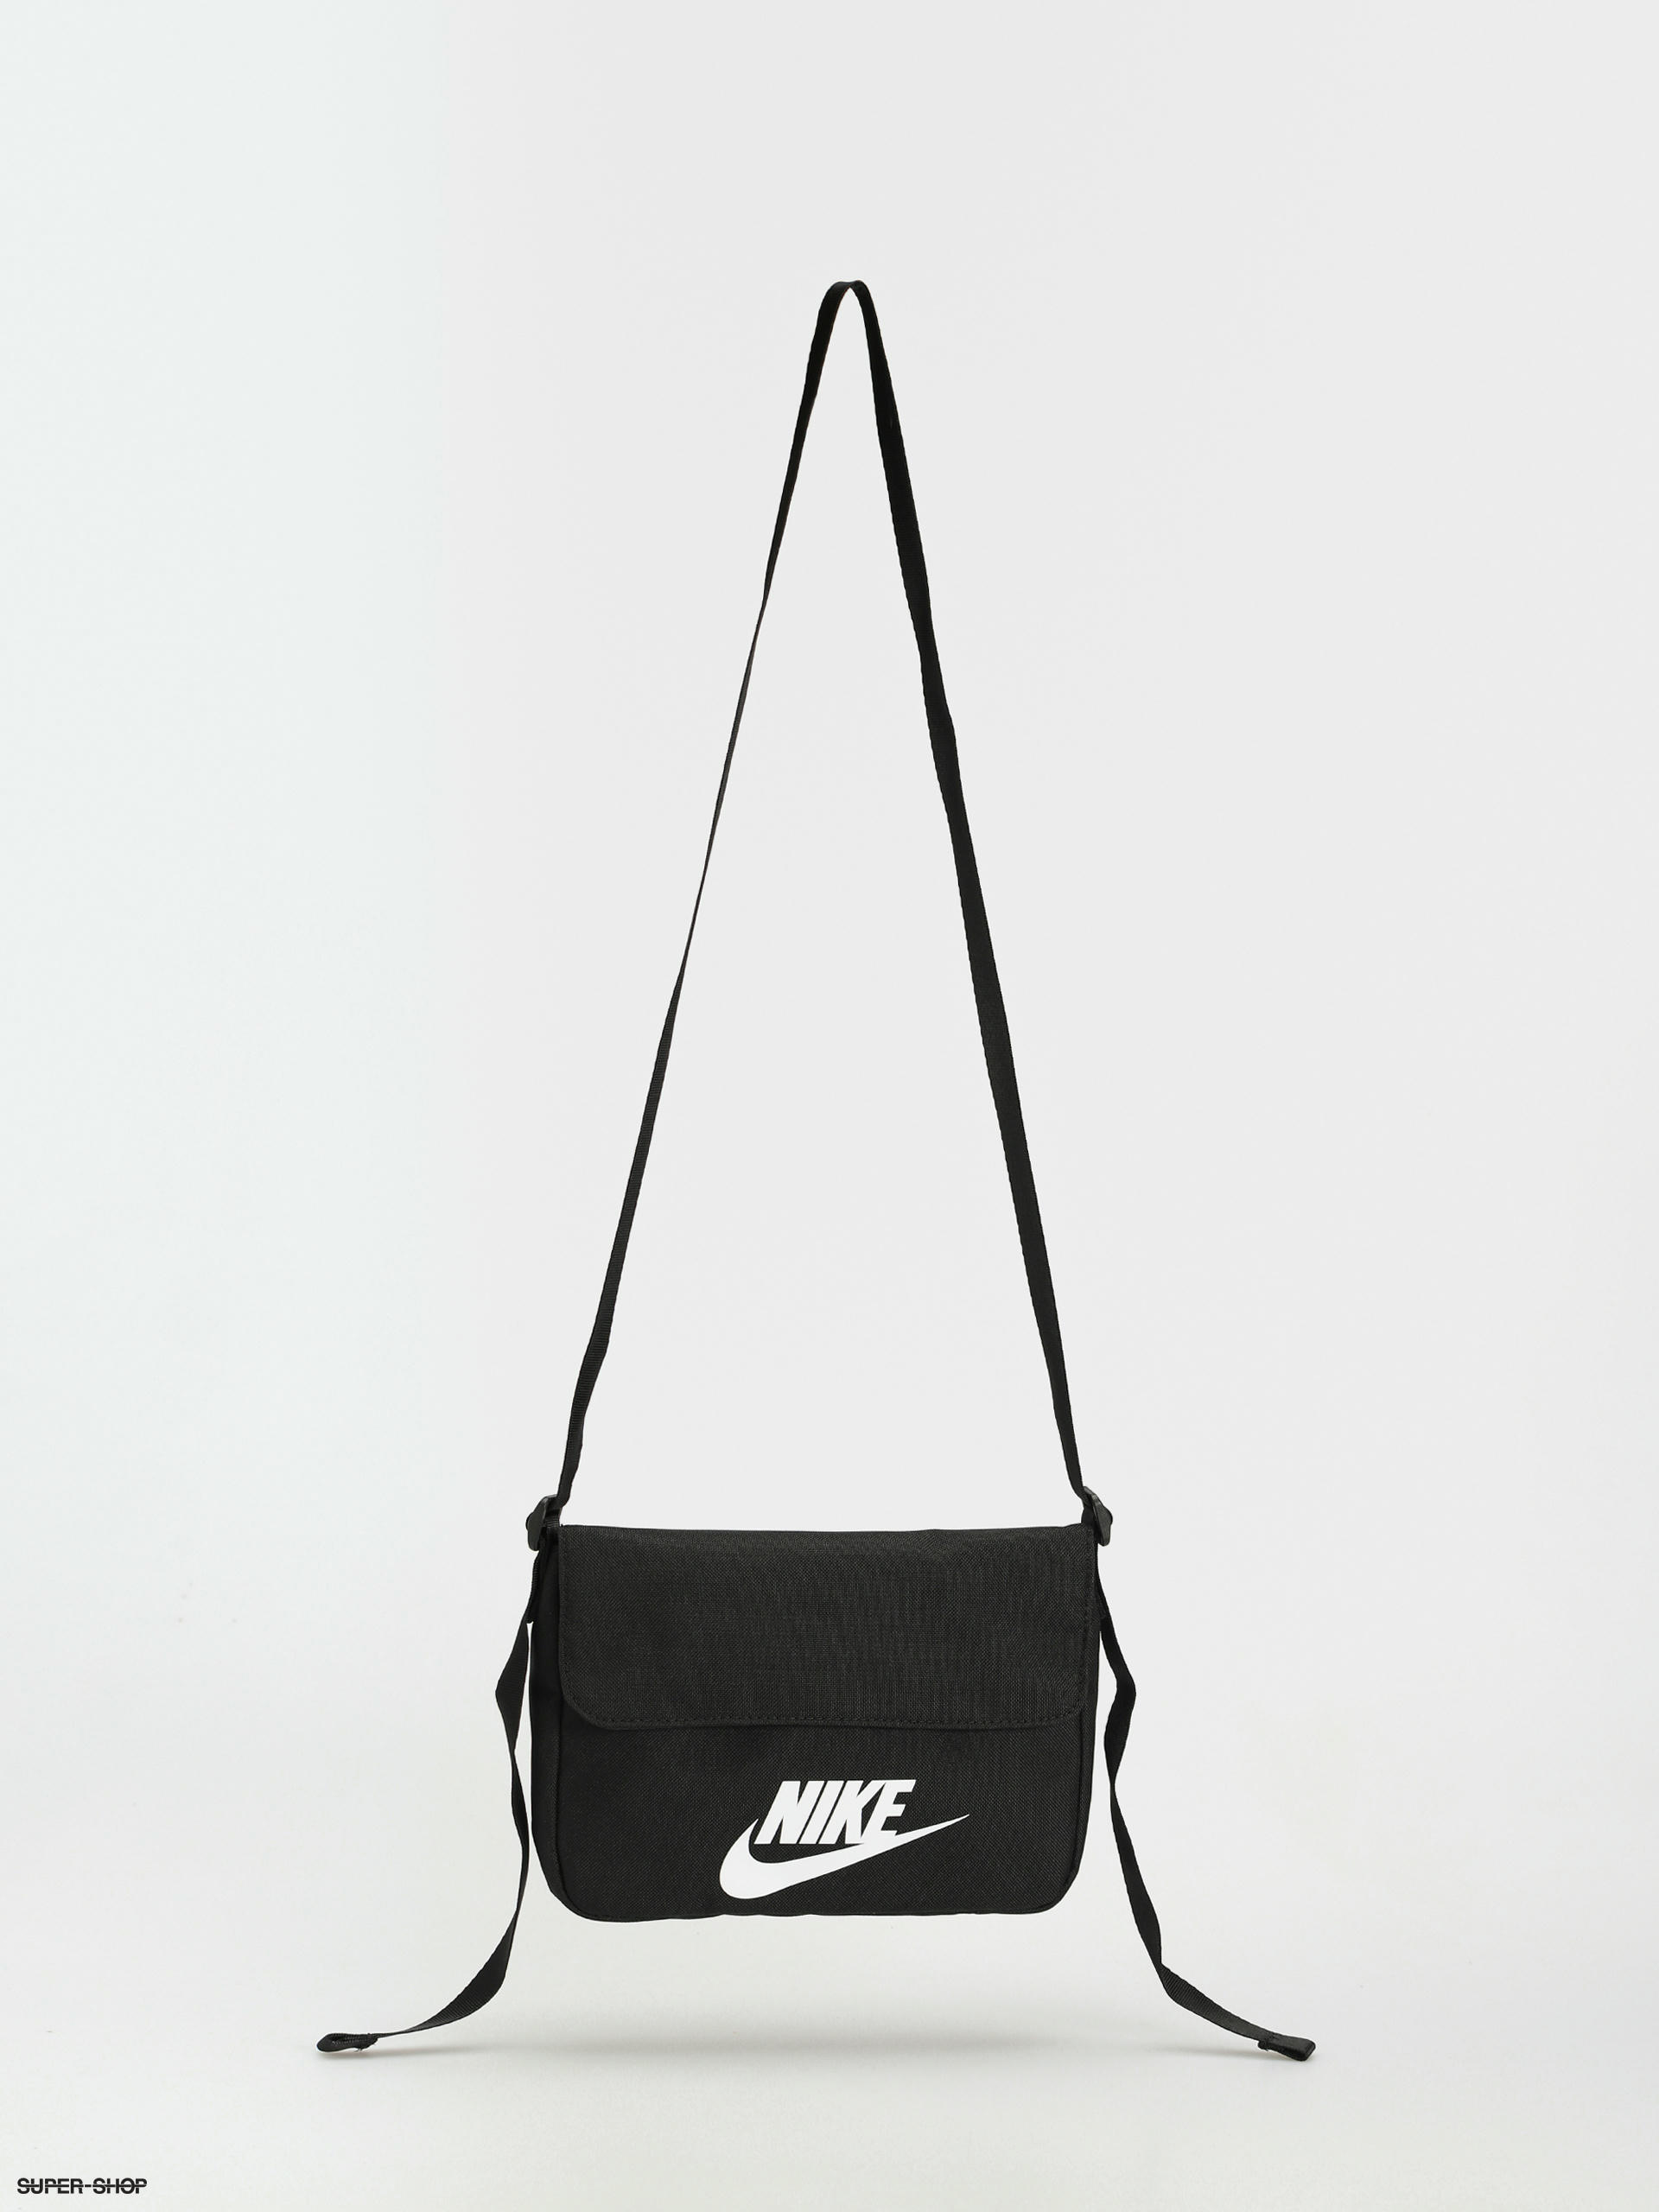 Unboxing/Reviewing The Nike Heritage Crossbody Bag 4L (On Body) - YouTube